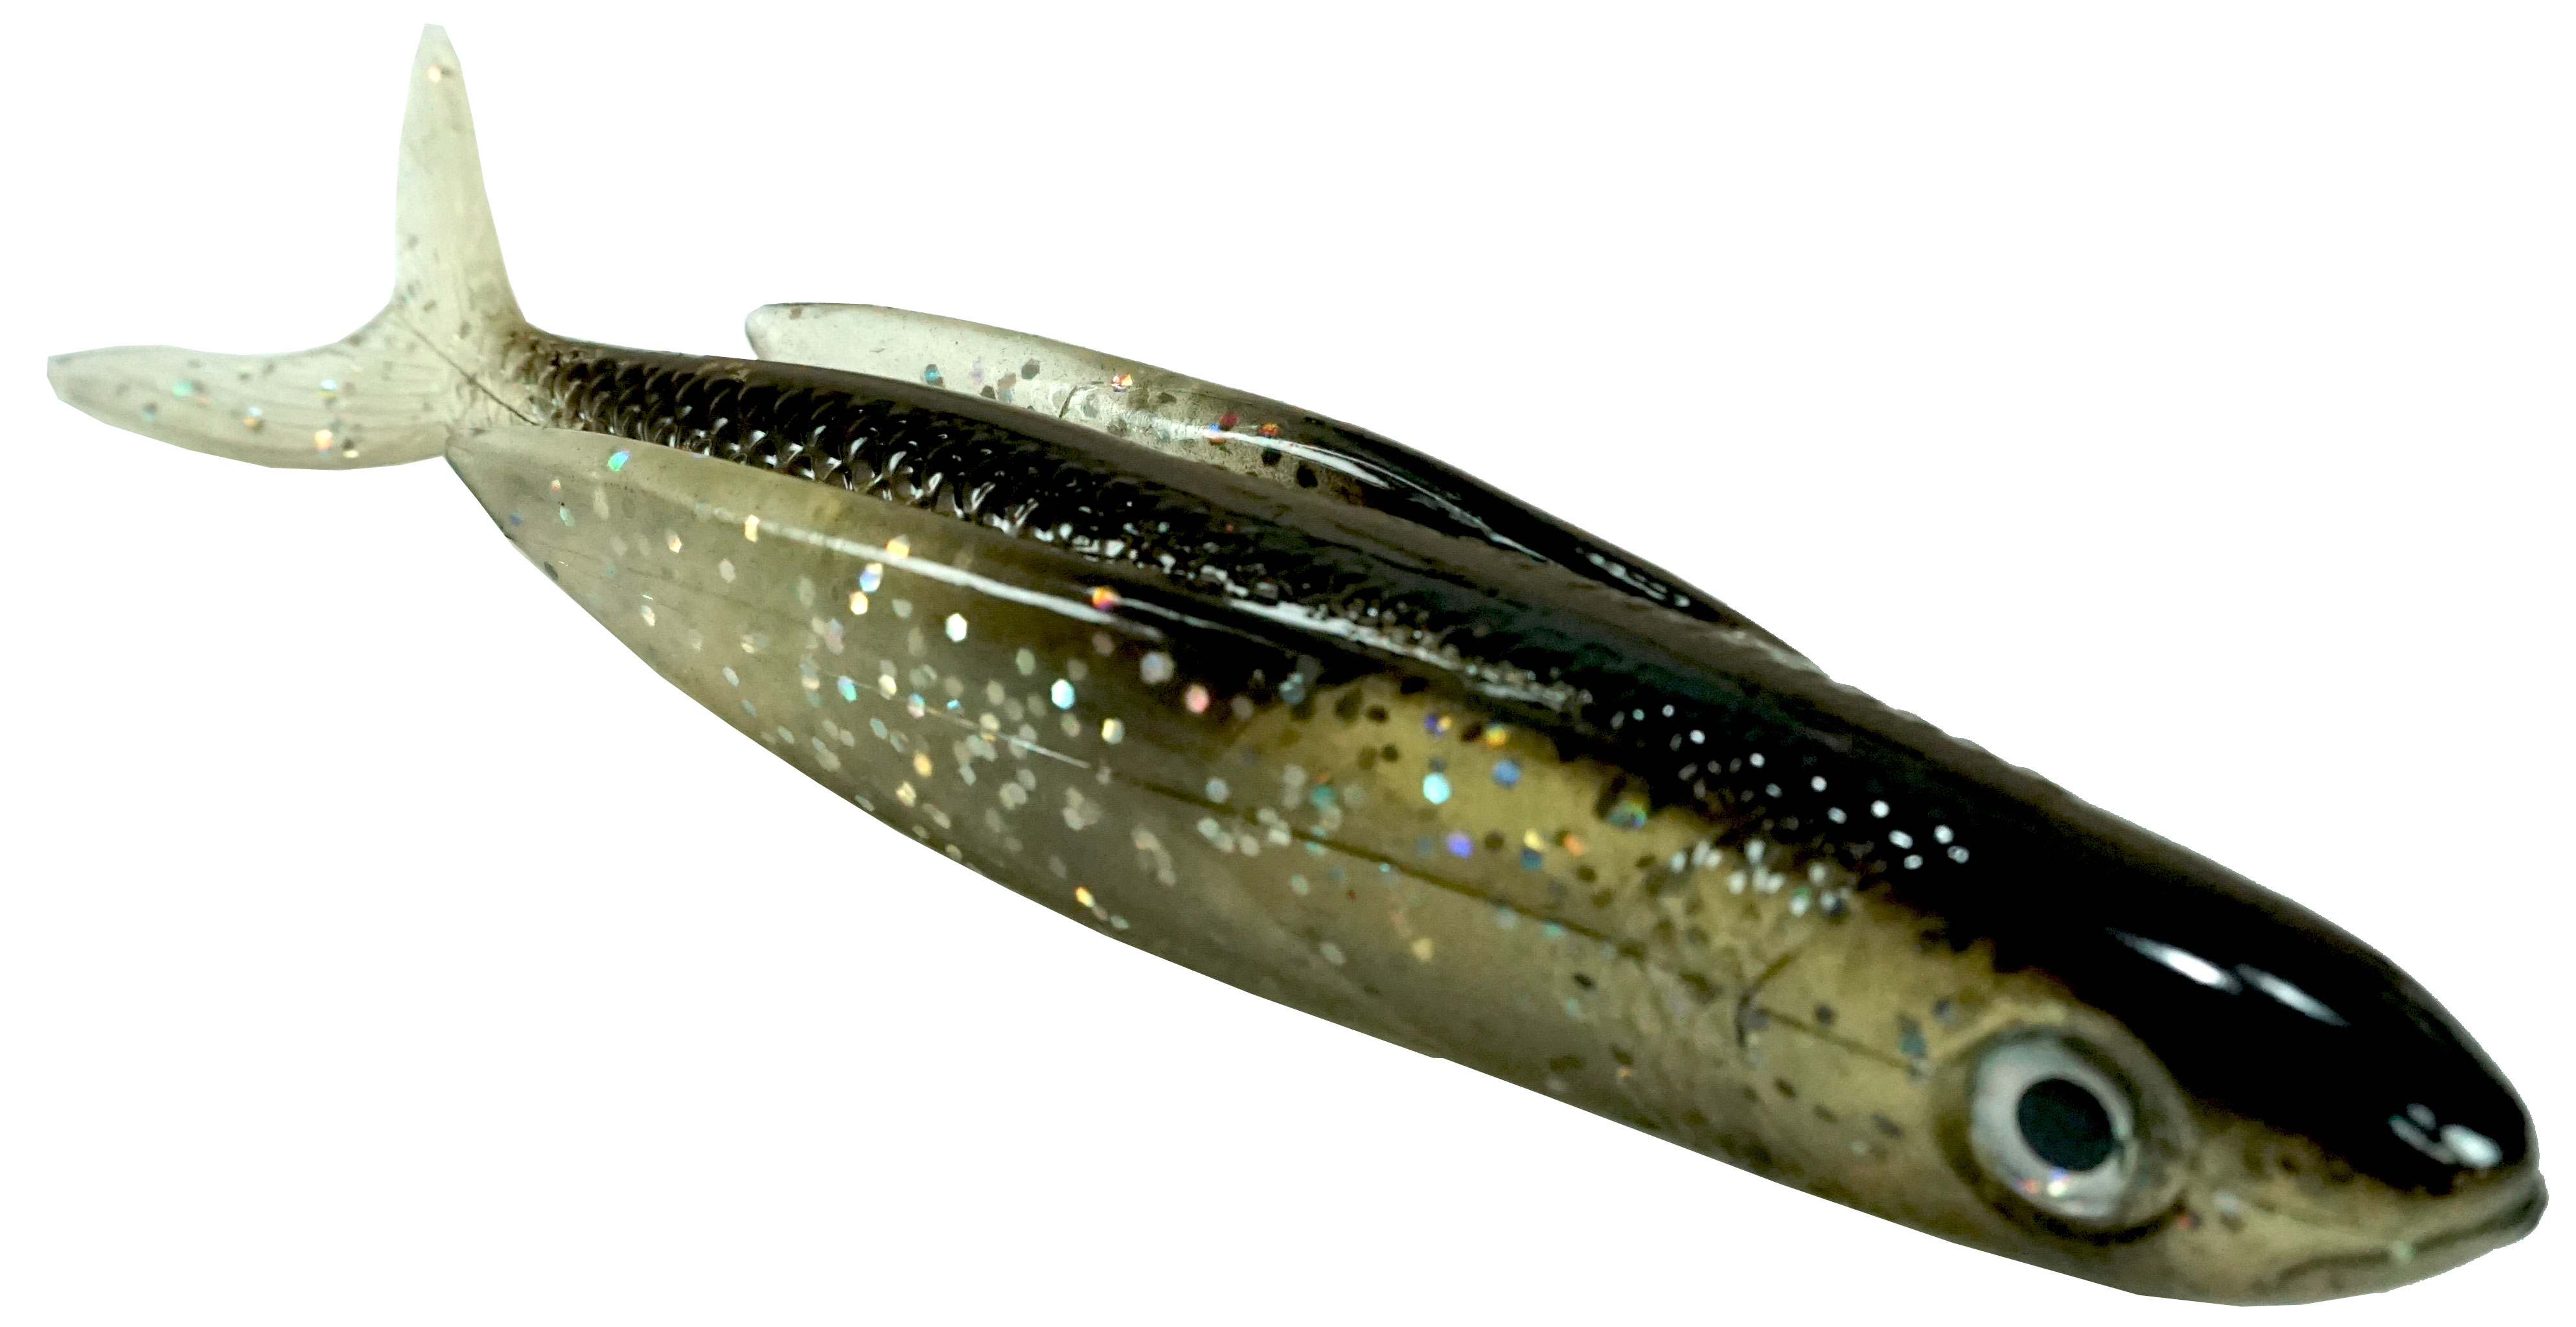 Almost Alive Lures 8.5" Soft Plastic Flying Fish with Swept Back Wing Bait Black/Clear/Glitter